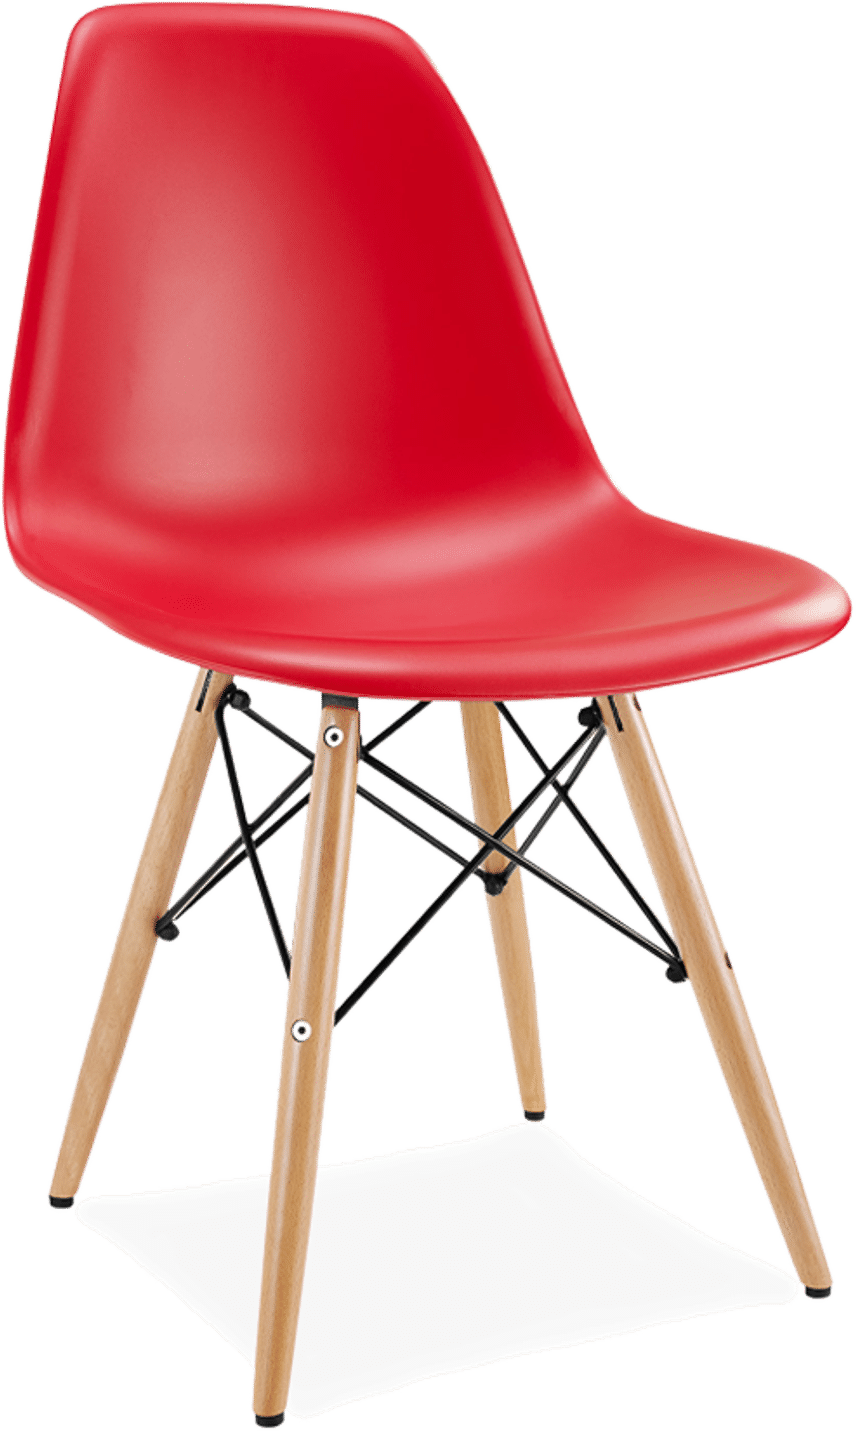 DSW Style Chair Red/Light Wood image.